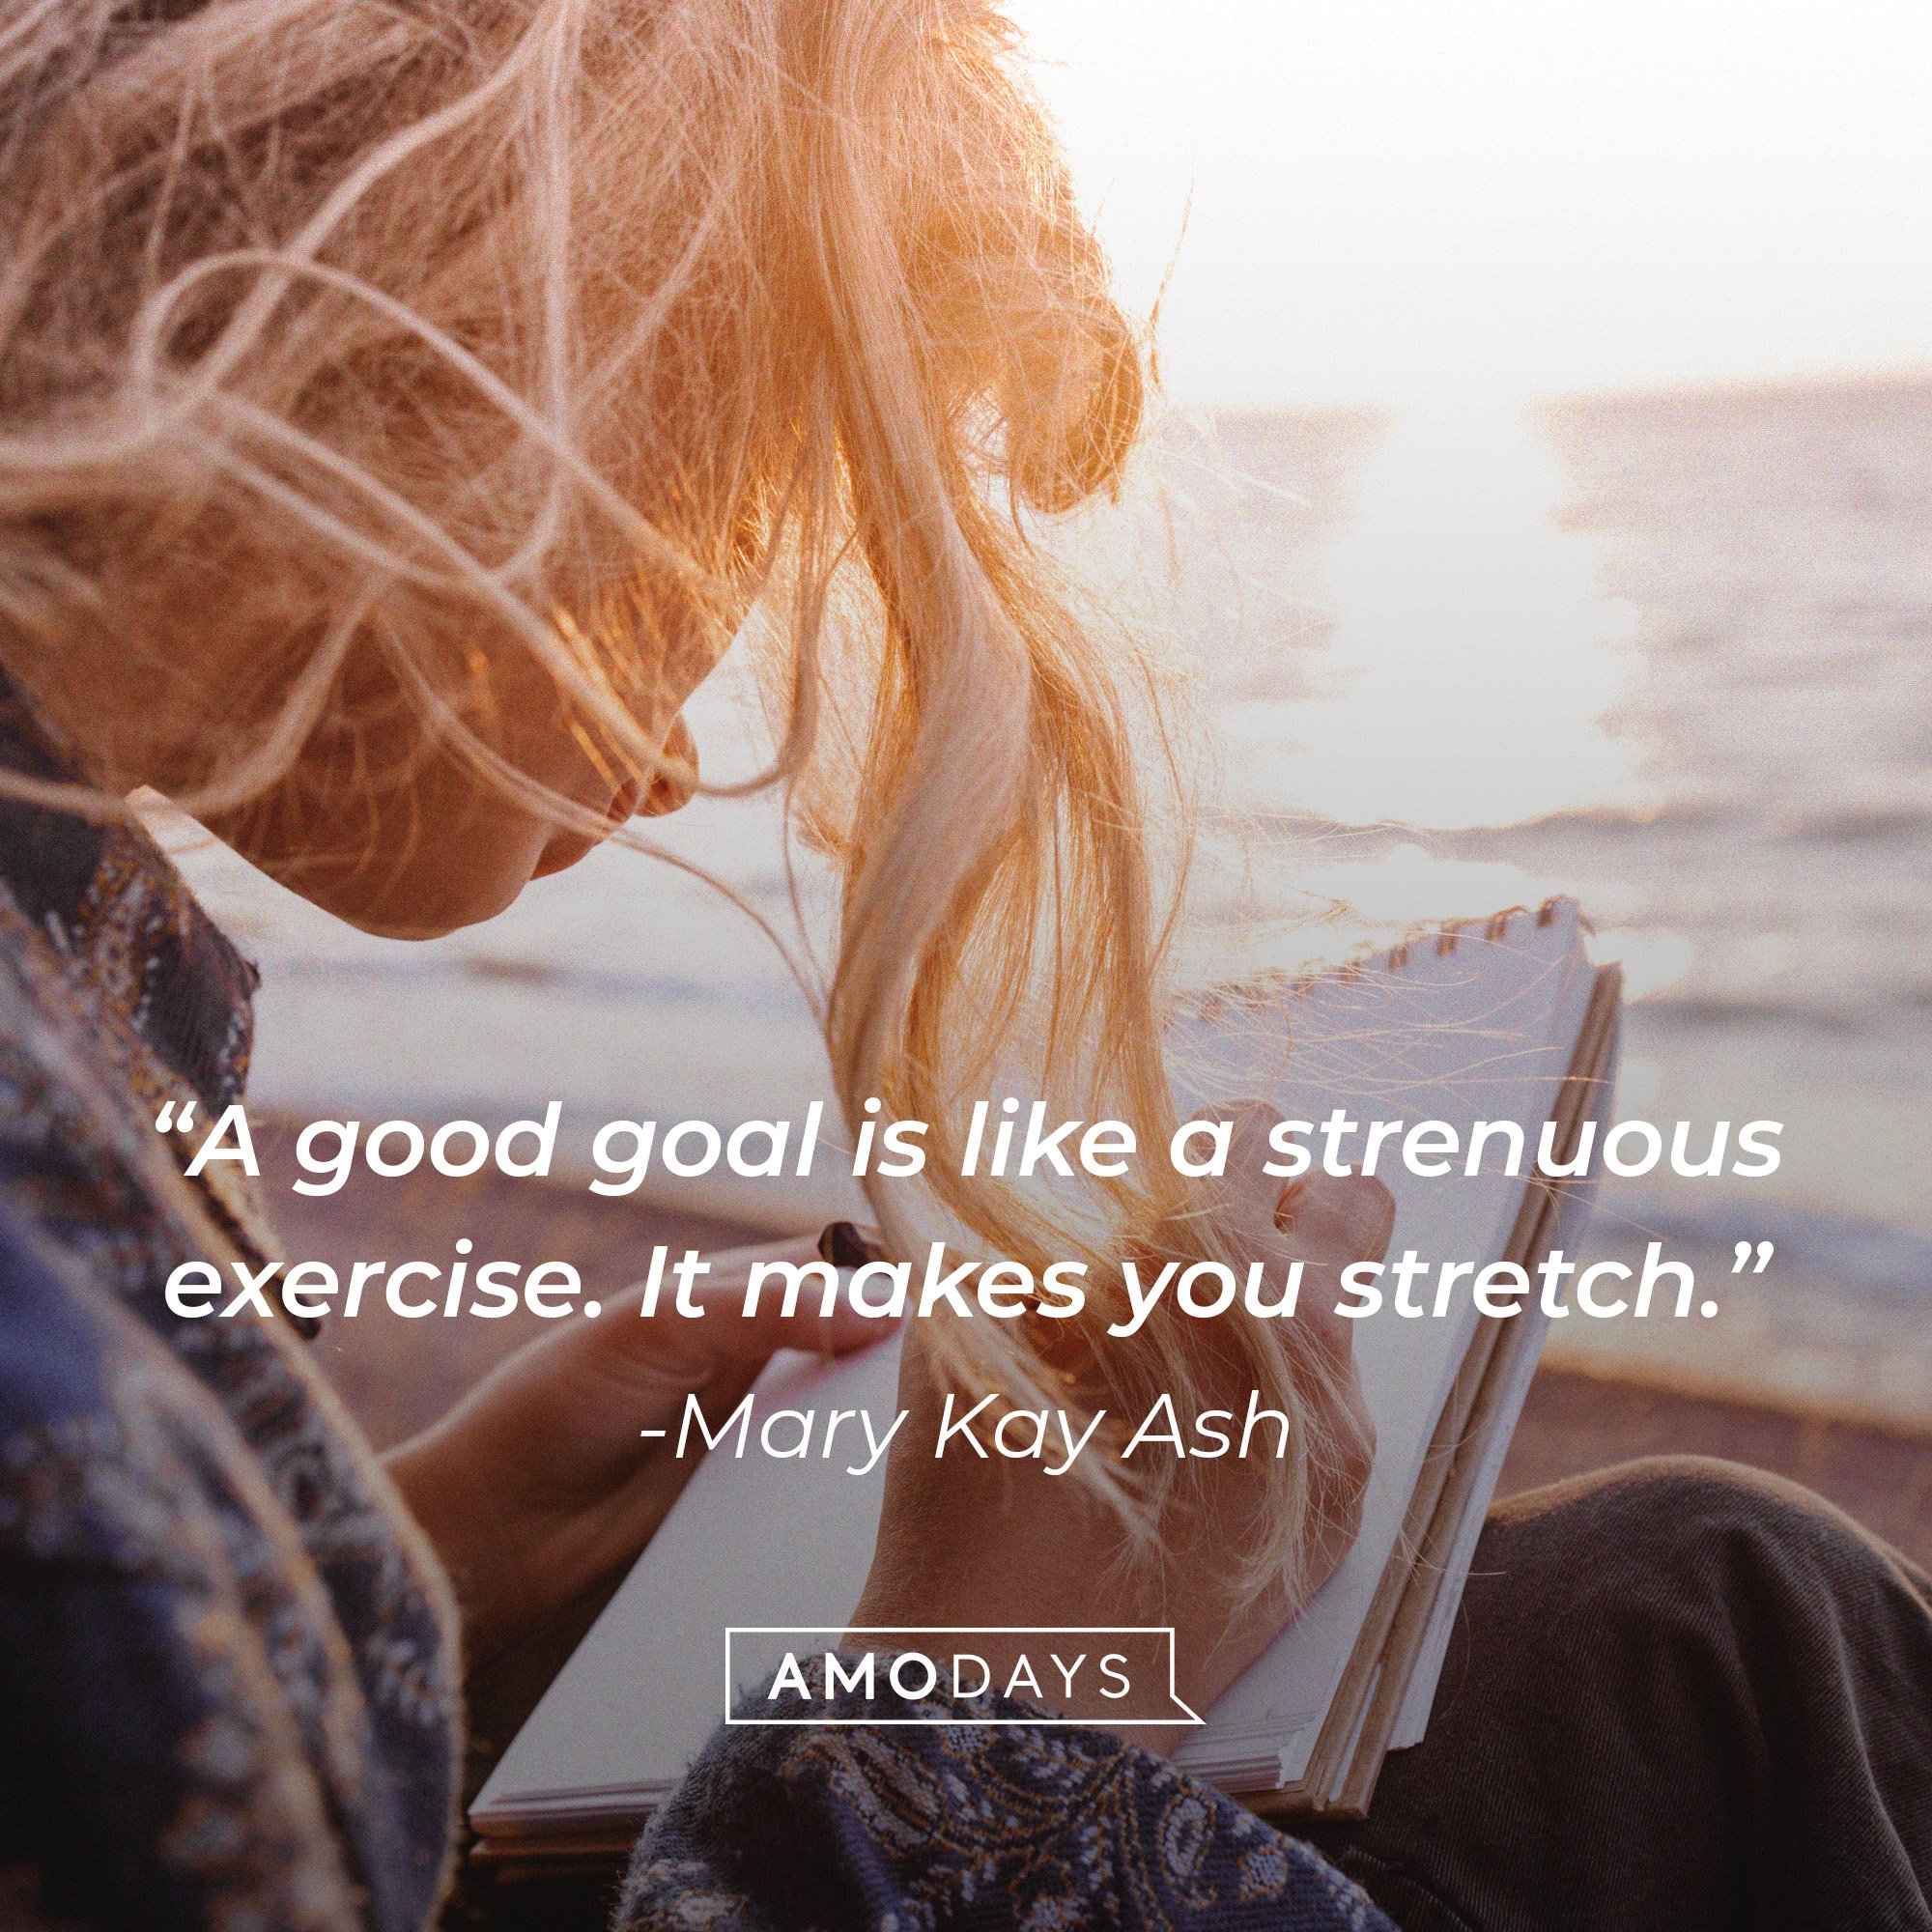 Mary Kay Ash's quote: “A good goal is like a strenuous exercise. It makes you stretch.” | Image: AmoDays 